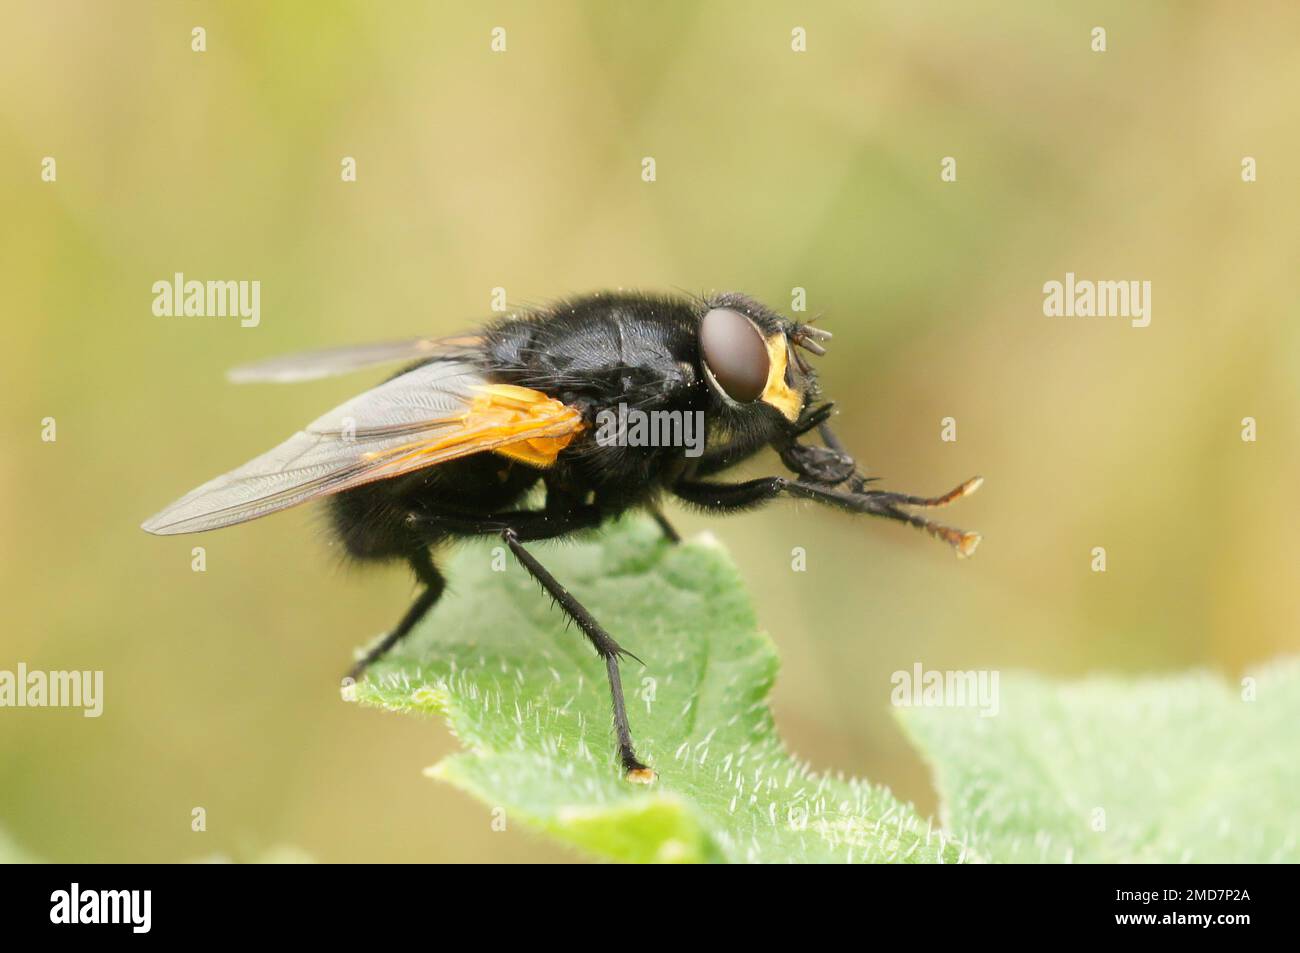 Detailed closeup on a black and orange Noonday fly, Mesembrina meridiana sitting on a green leaf Stock Photo